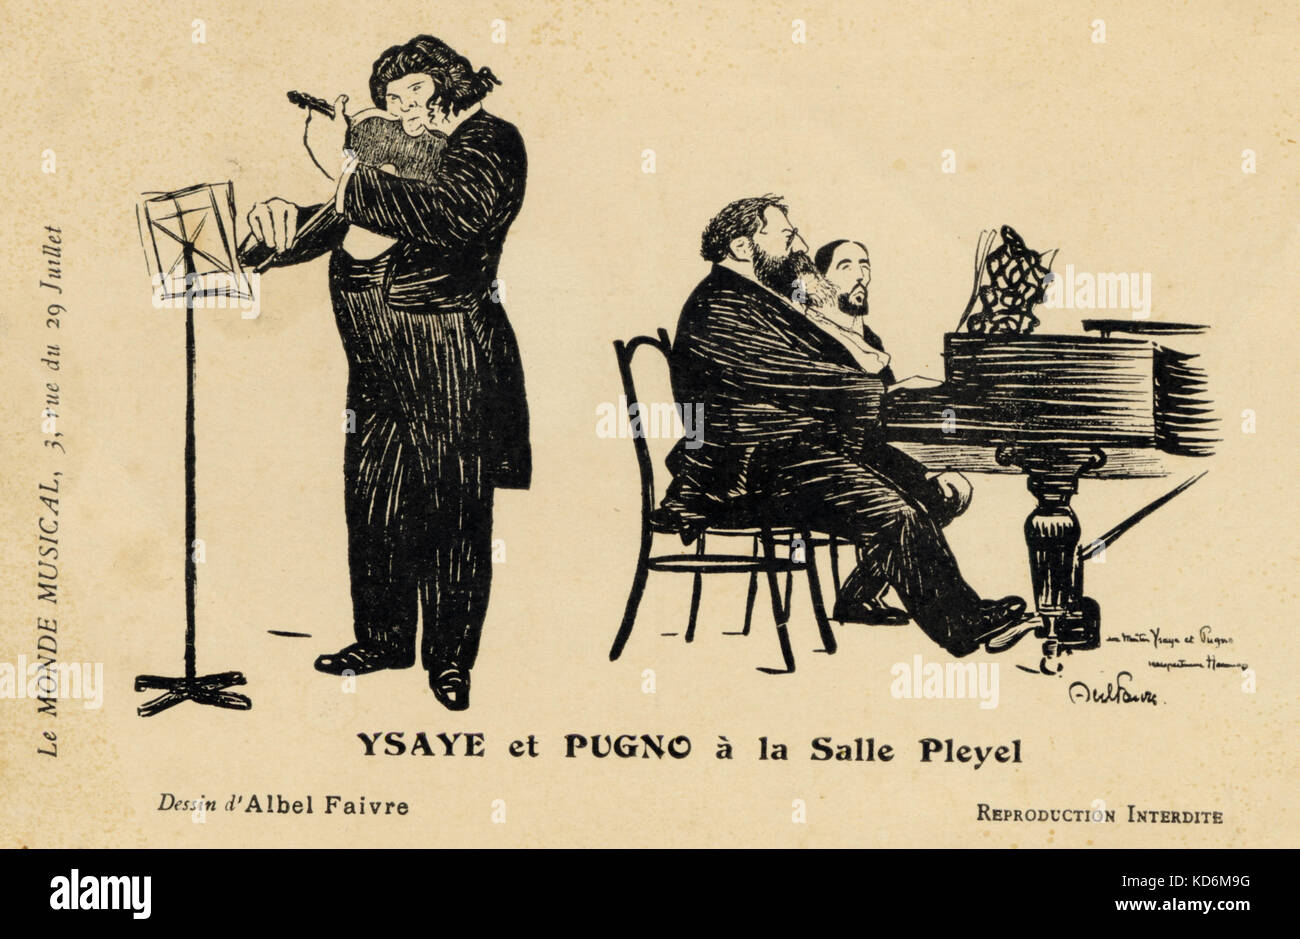 Eugene Ysaye - caricature of the Belgian violinist performing with French pianist Raoul Pugno at the Salle Pleyel, Paris. Drawing by Albel Faivre. Published by Le Monde Musical. (EY:1858-1931) (RP: 1852-1914) Stock Photo